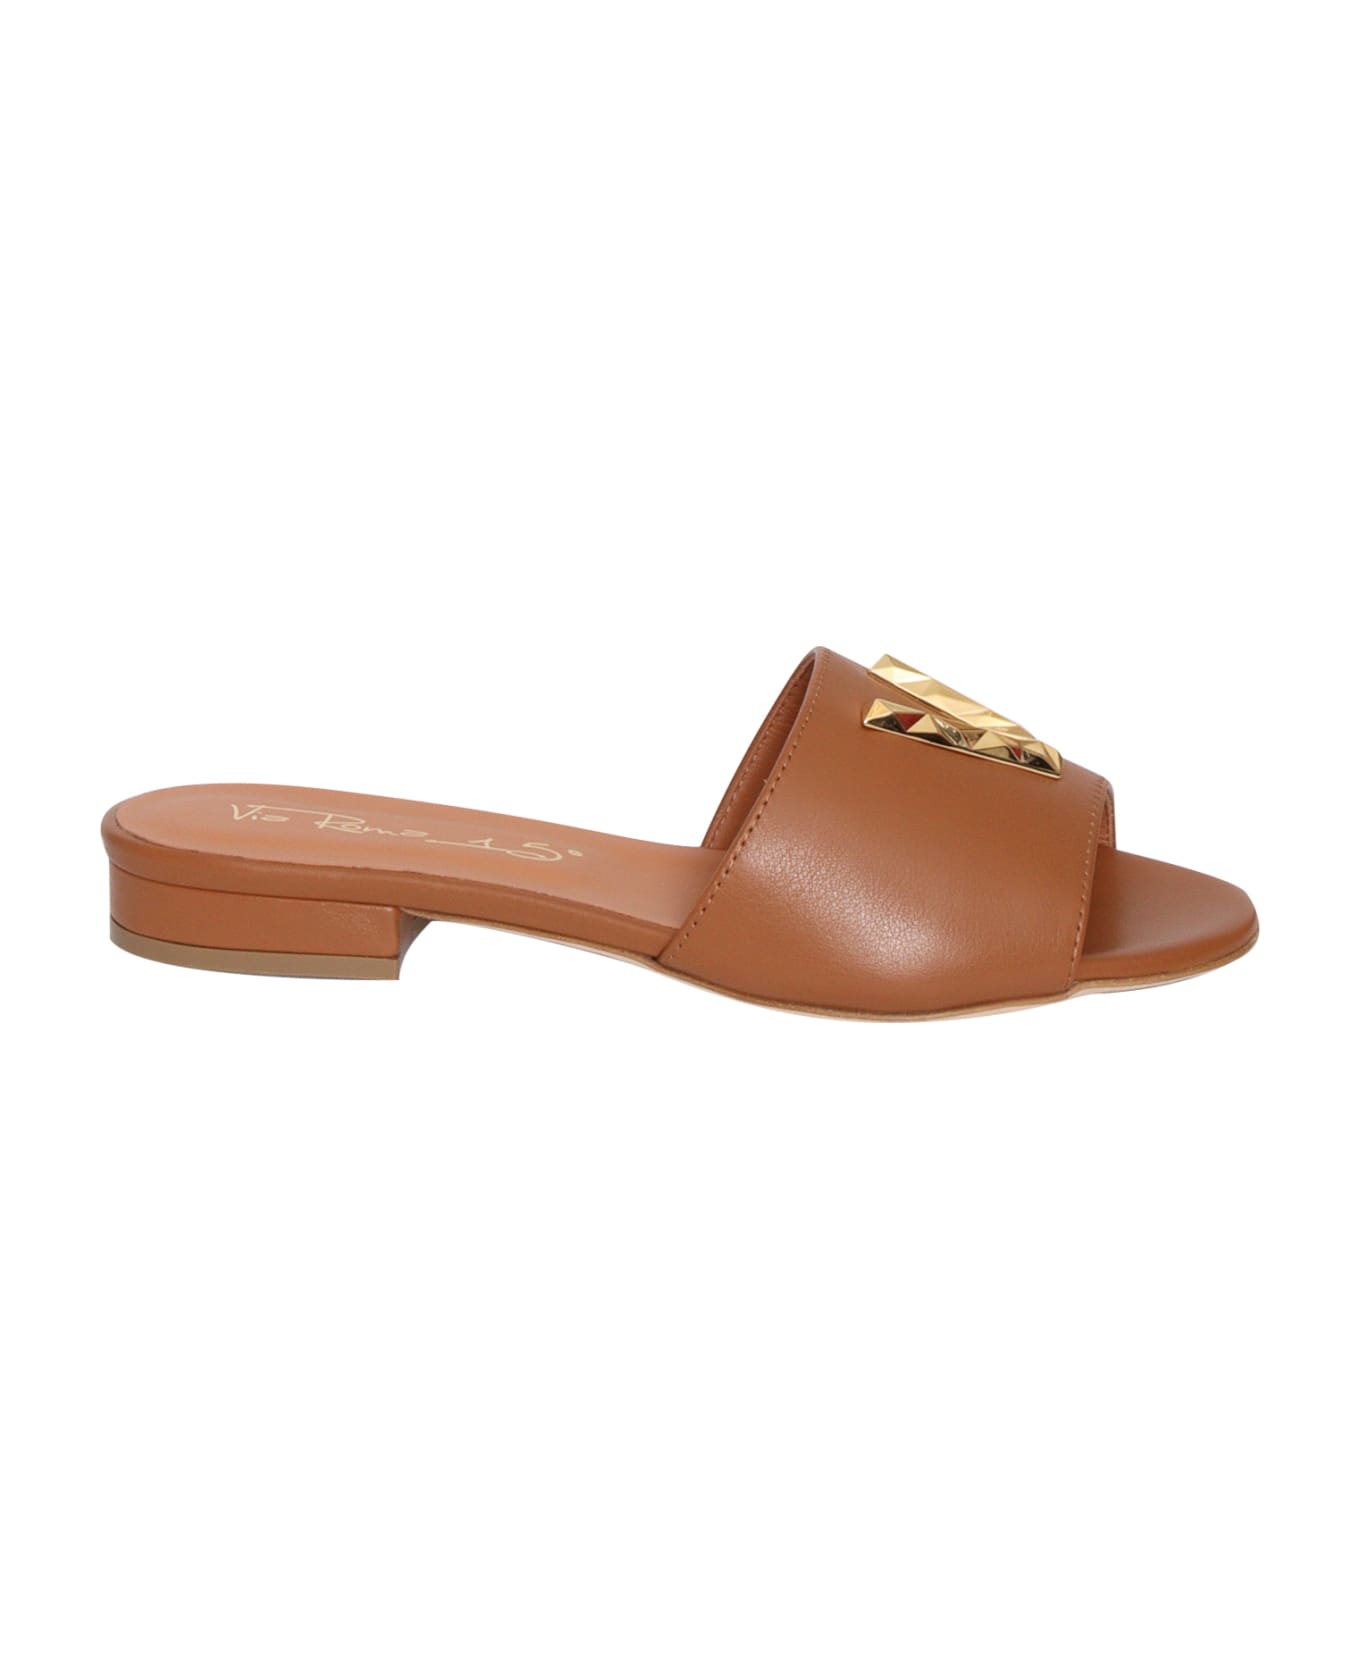 Via Roma 15 Brown Leather Slippers - BROWN